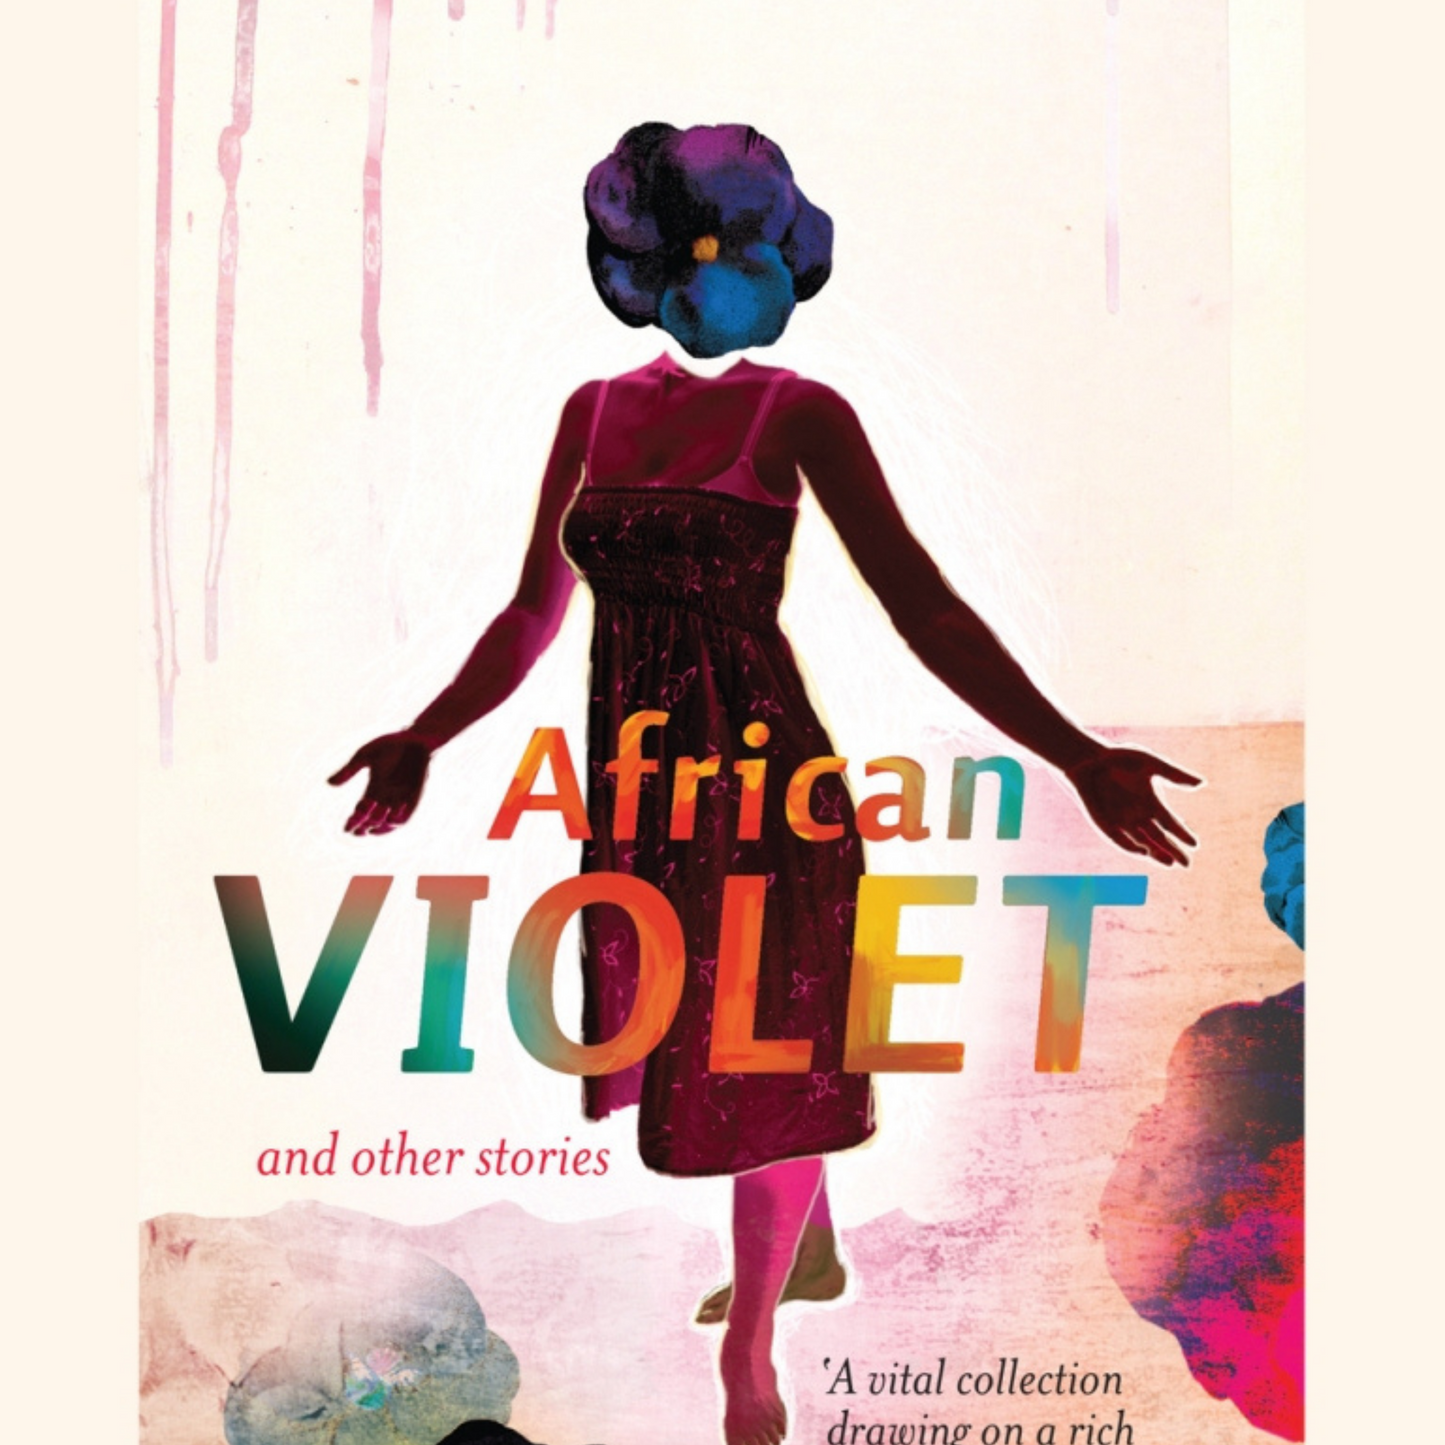 African Violet and Other Stories